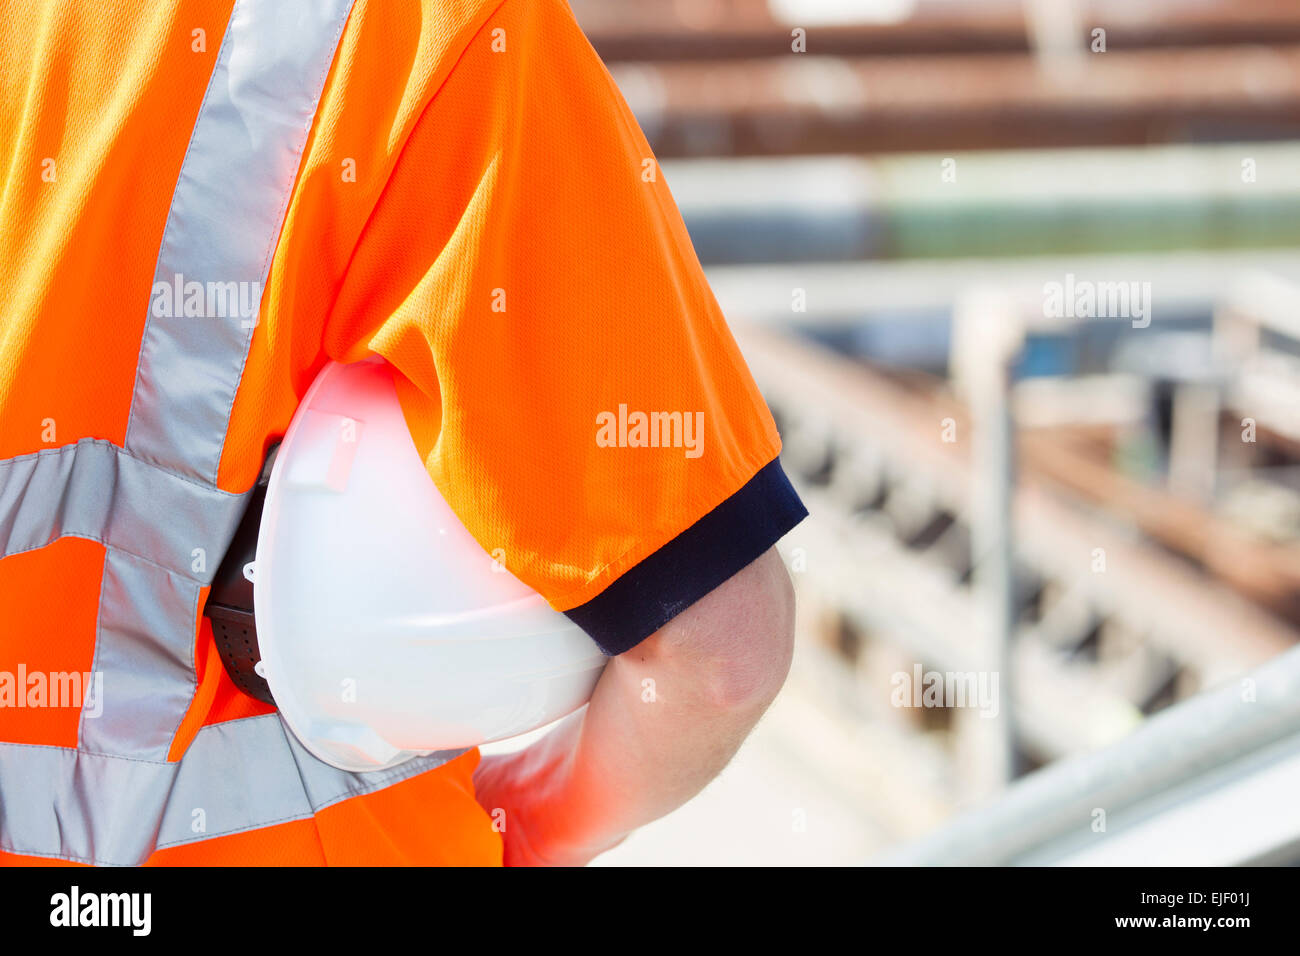 Man working at construction site, helmet Stock Photo